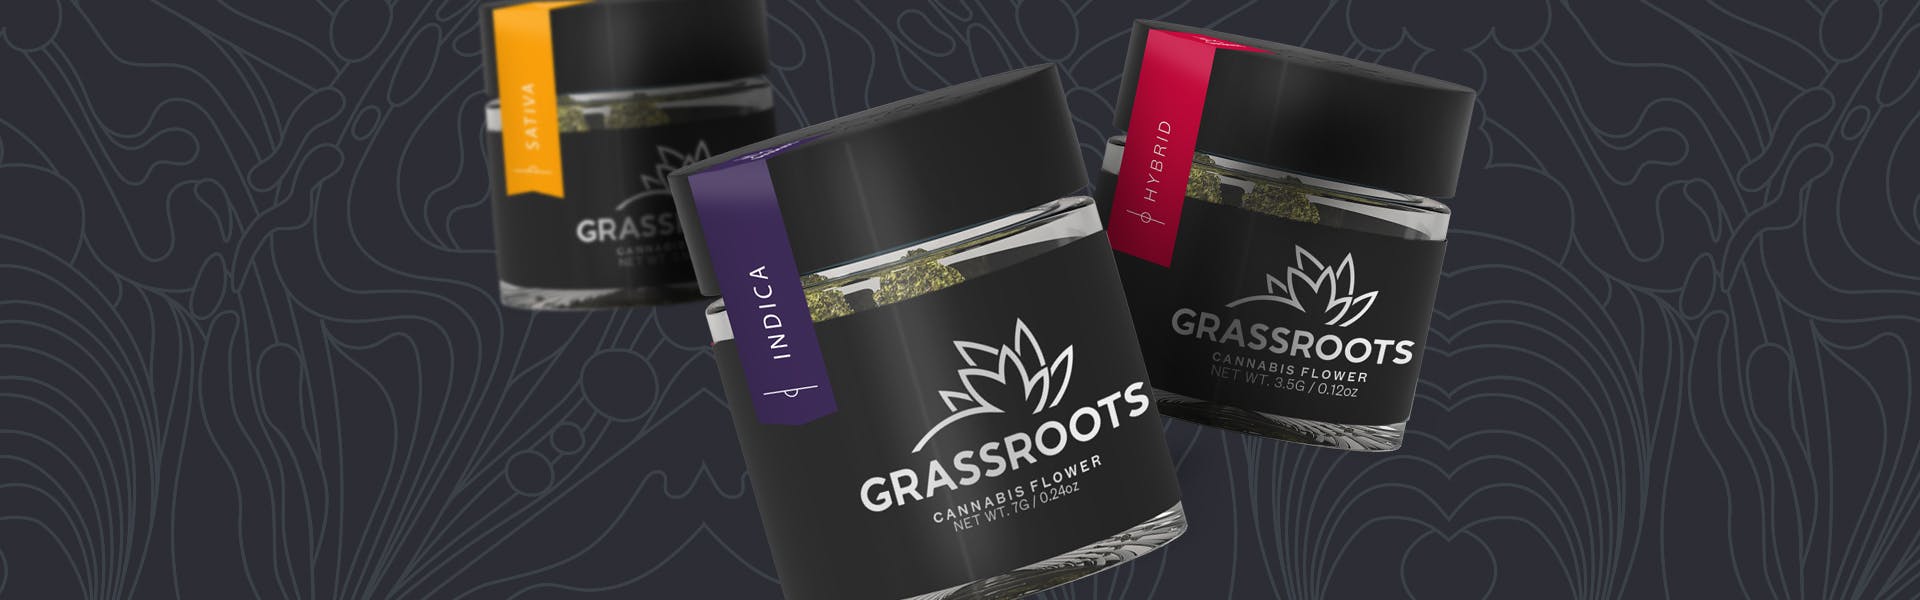 Grassroots craft cannabis is here! ​